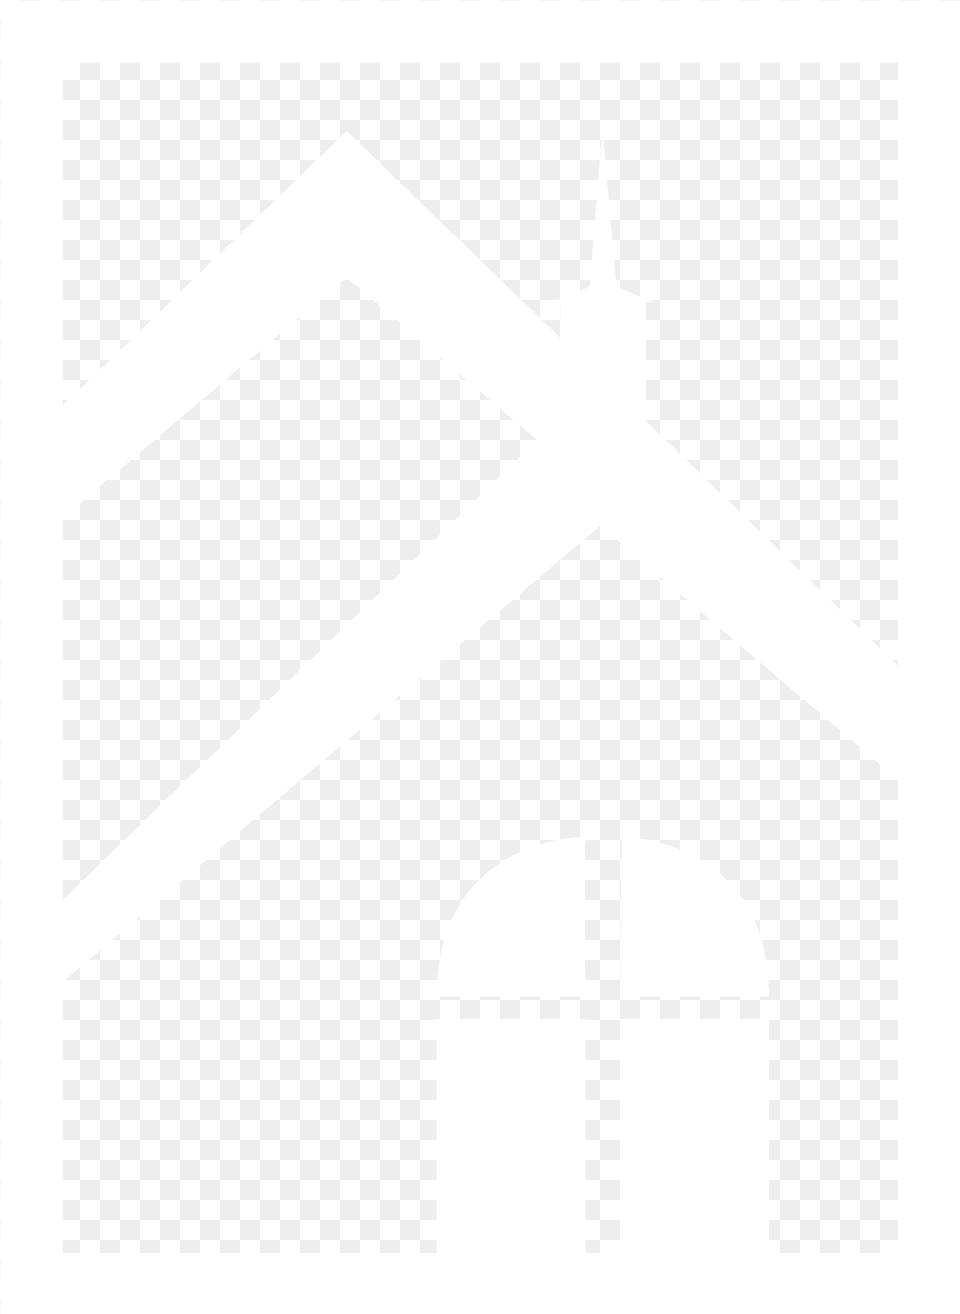 Image Valley Forge Baptist, Stencil, Cross, Symbol Free Png Download